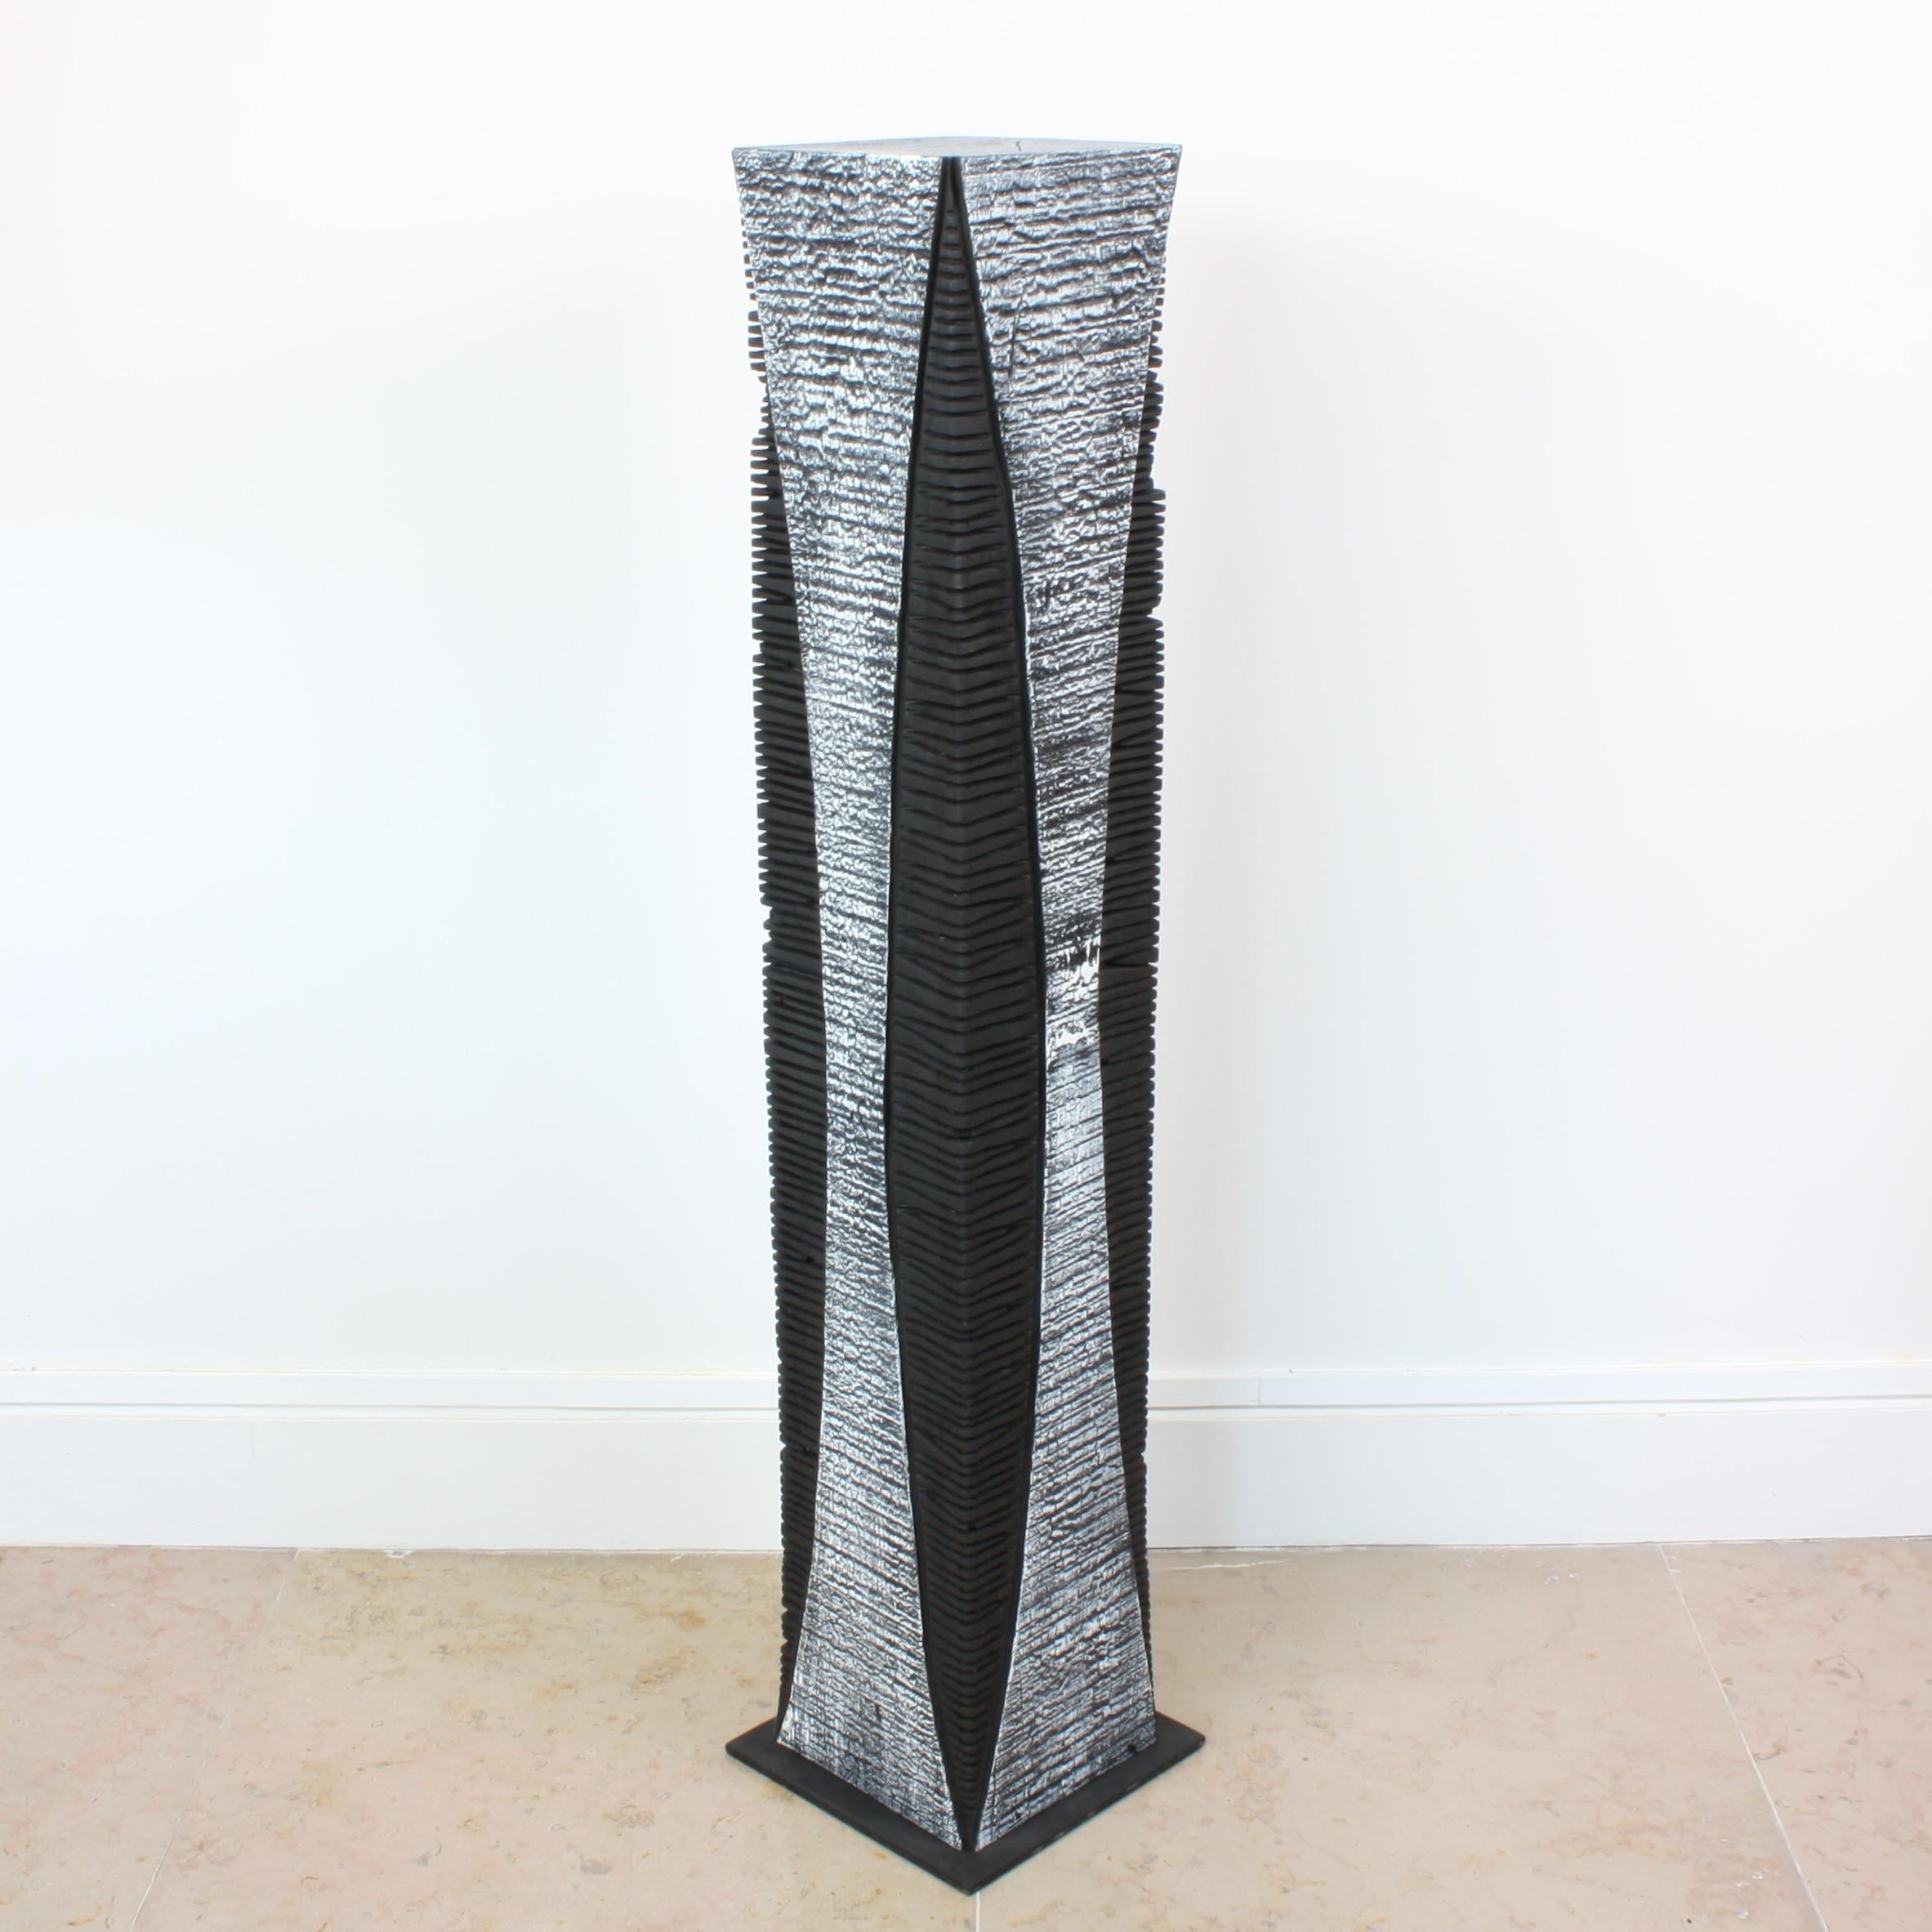 Beautifully textured contemporary wooden skyscraper sculpture on a metal stand. Artist Natacha Heitz finds the primary material for her extraordinary black and white wood sculpture in the Arolla pine. A stunning combination of surfaces and forms, it